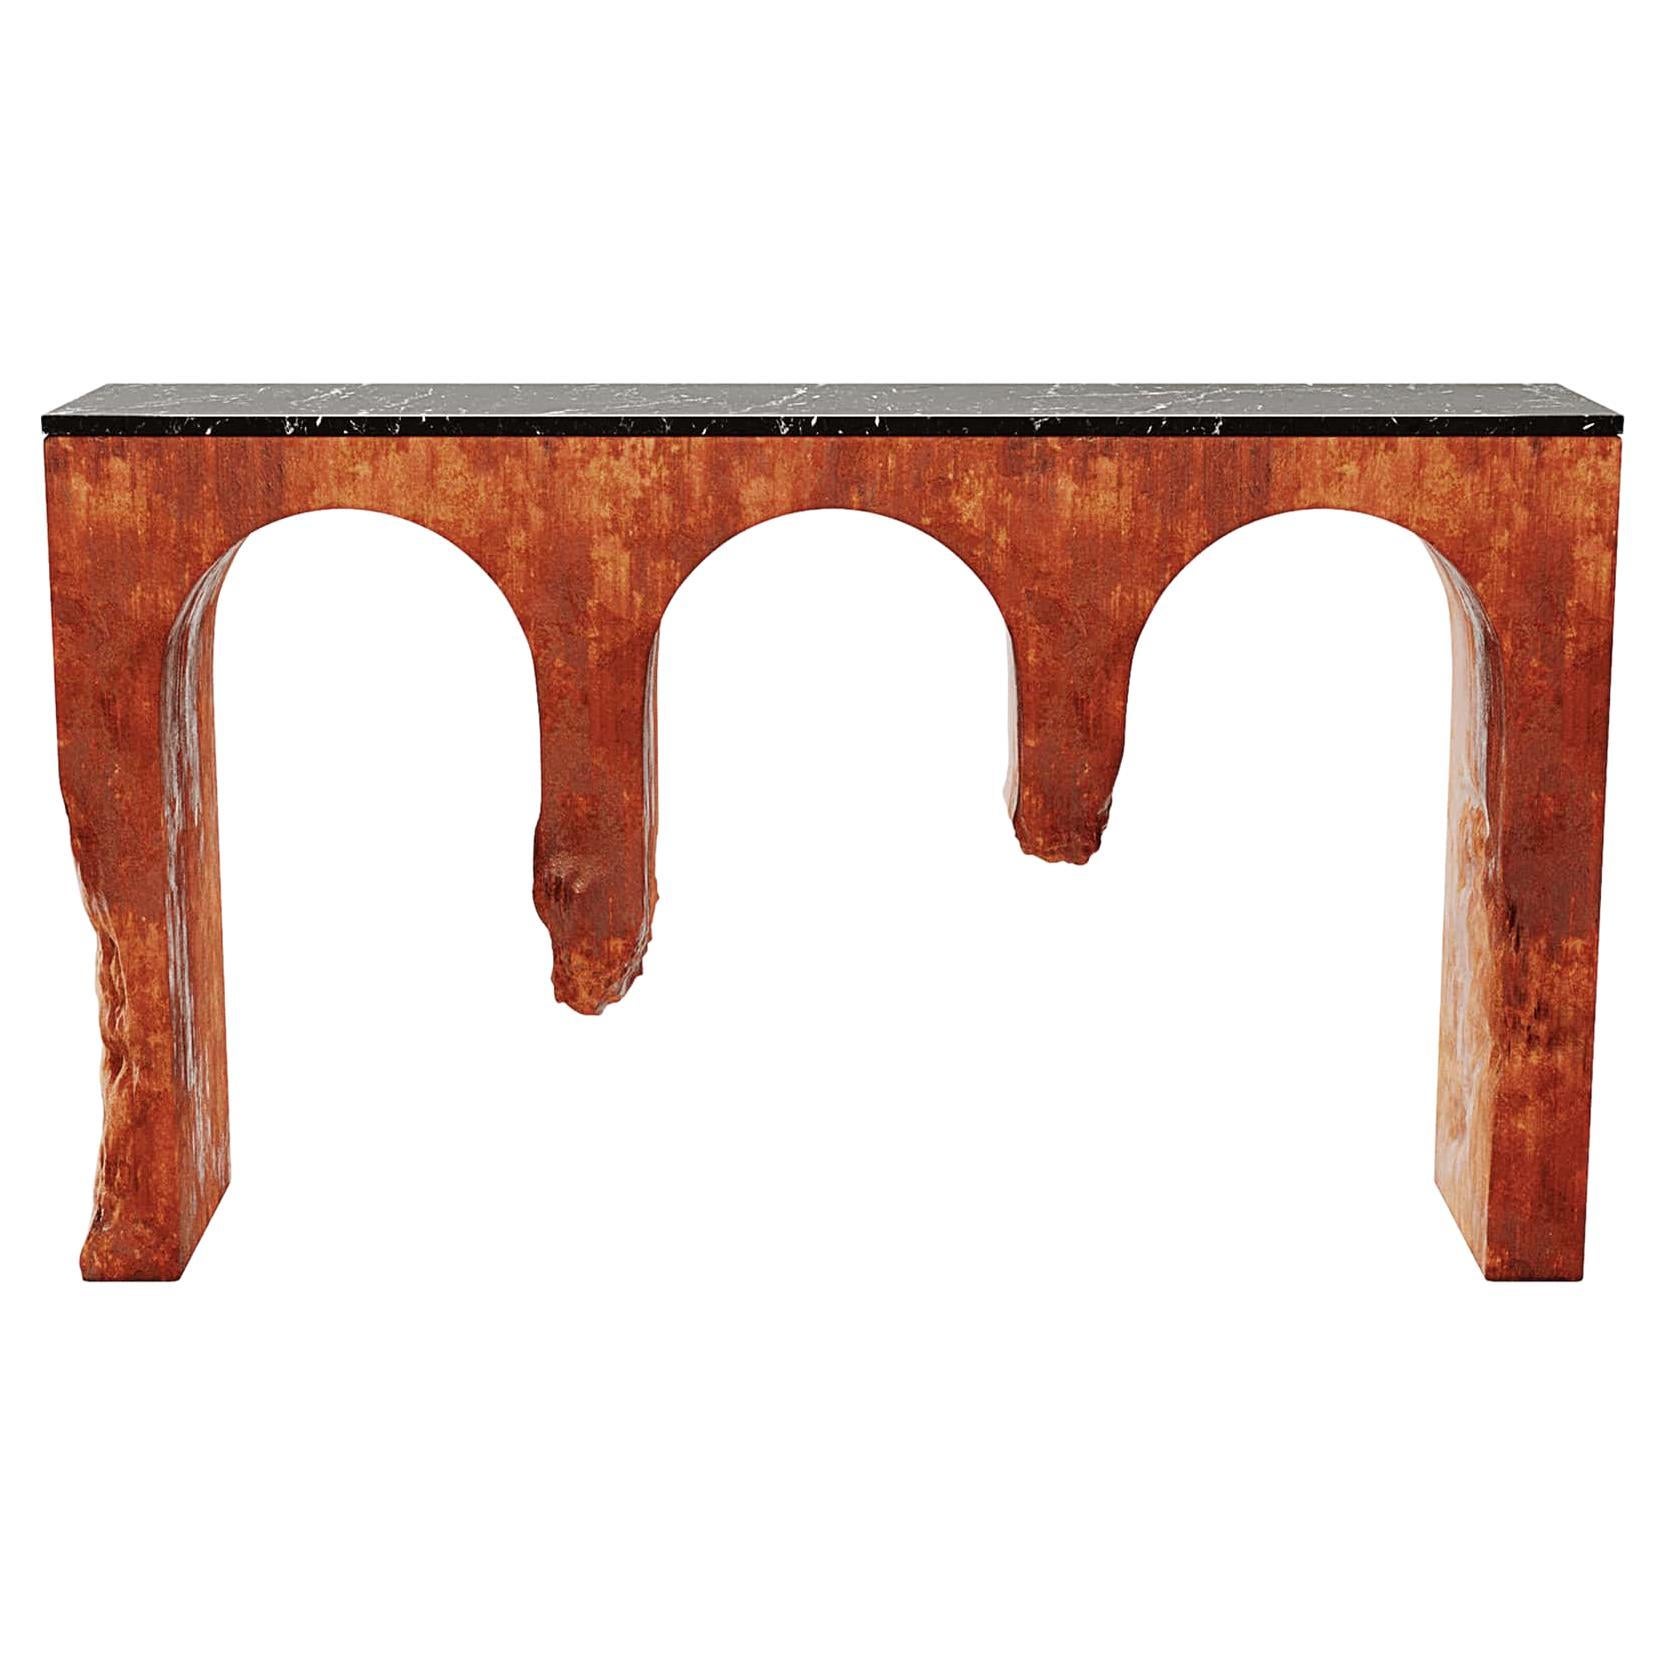 21st Century Modern Console Table Nero Marquina Marble & Rust Effect Lacquer